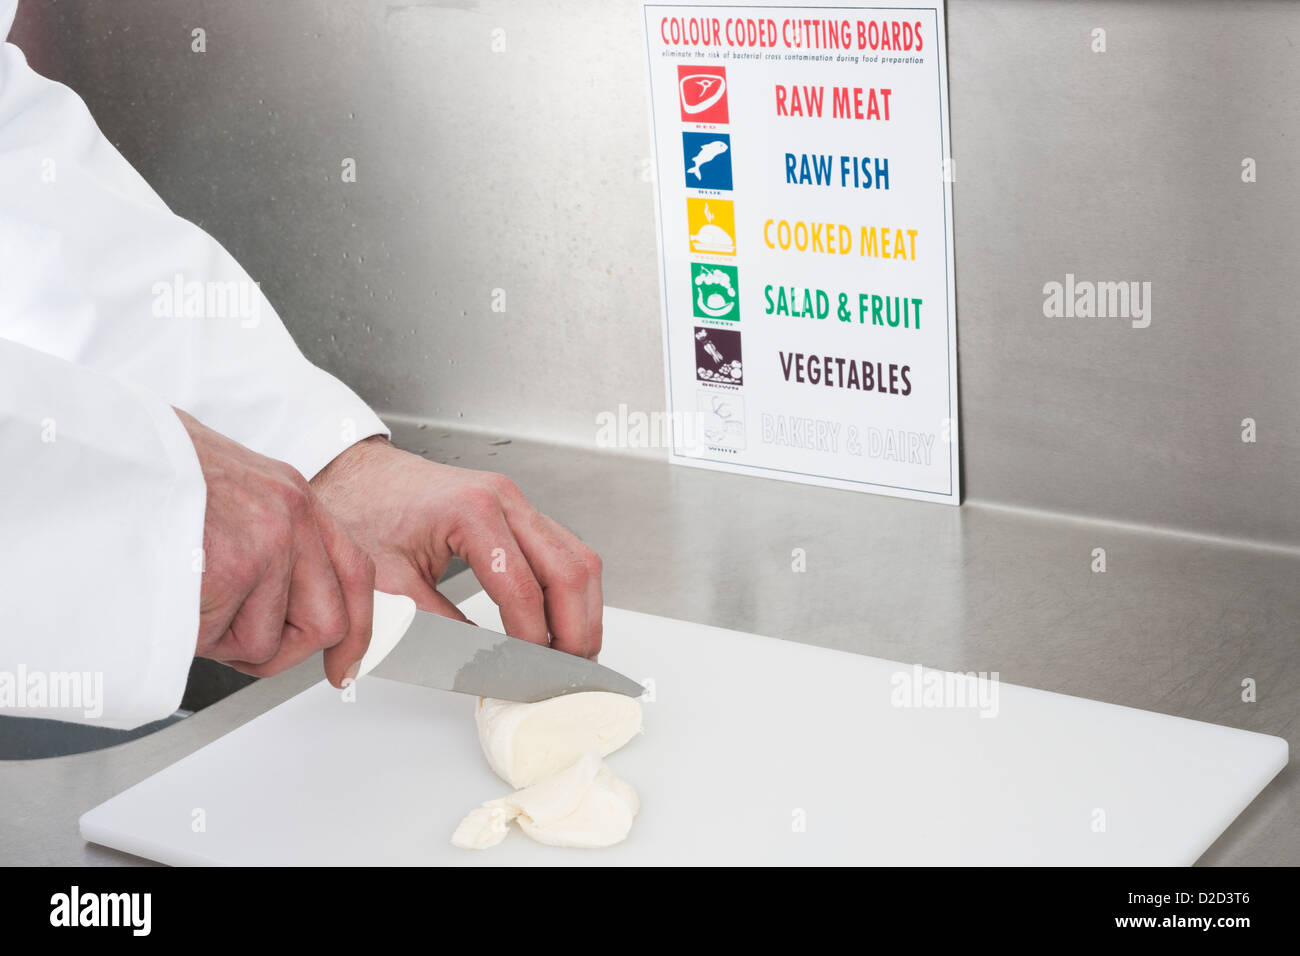 MODEL RELEASED Cutting cheese Working cutting cheese on the appropriate colour-coded board Stock Photo